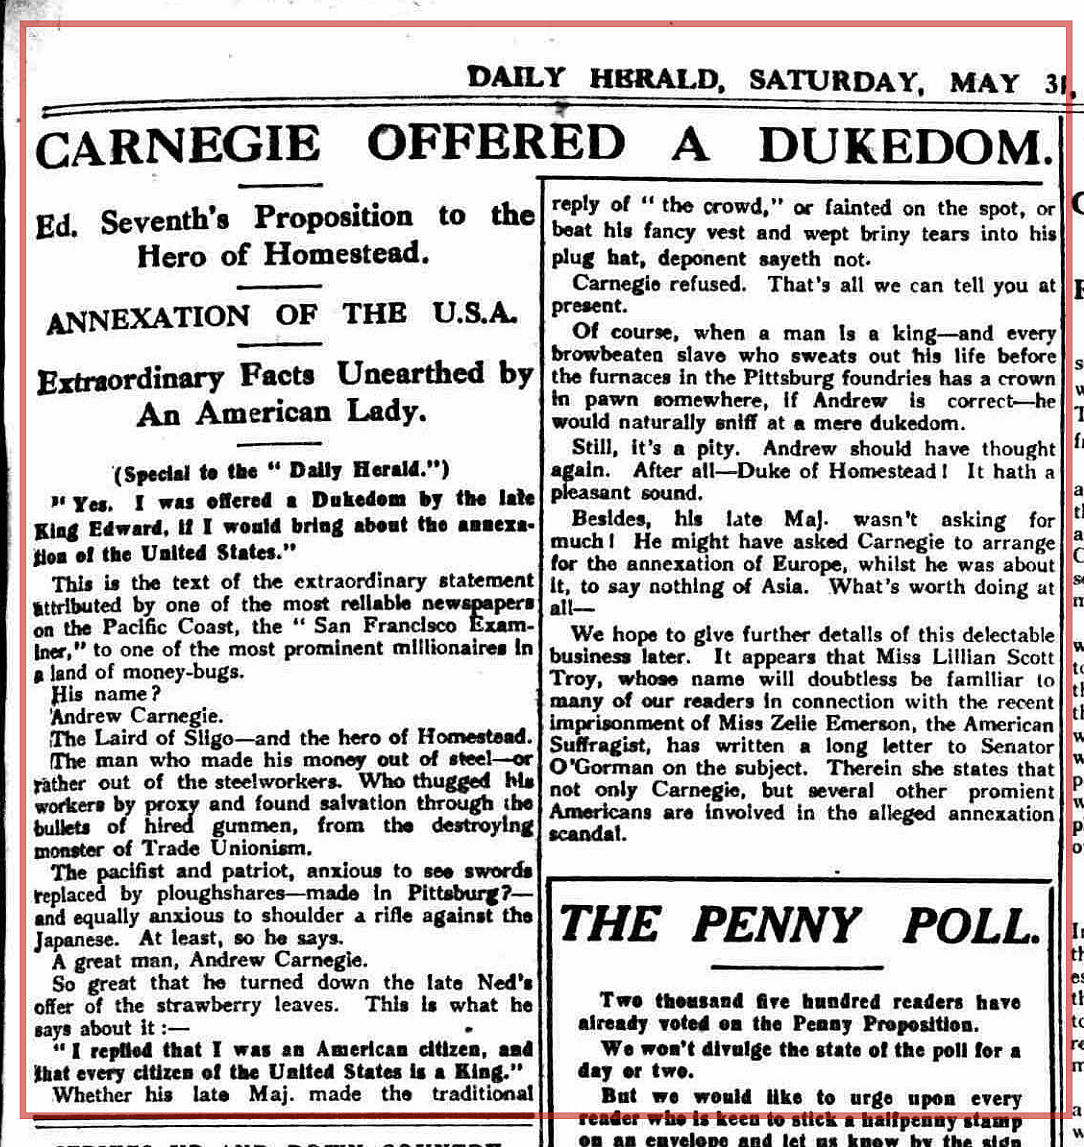 Editor. (May 31, 1913). CARNEGIE OFFERED A DUKEDOM, [King] Edward VI's Proposition to the Hero of Homestead, ANNEXATION OF THE U.S.A., Extraordinary Facts Unearthed by An American Lady [Lillian Scott Troy]. Daily Herald (London).